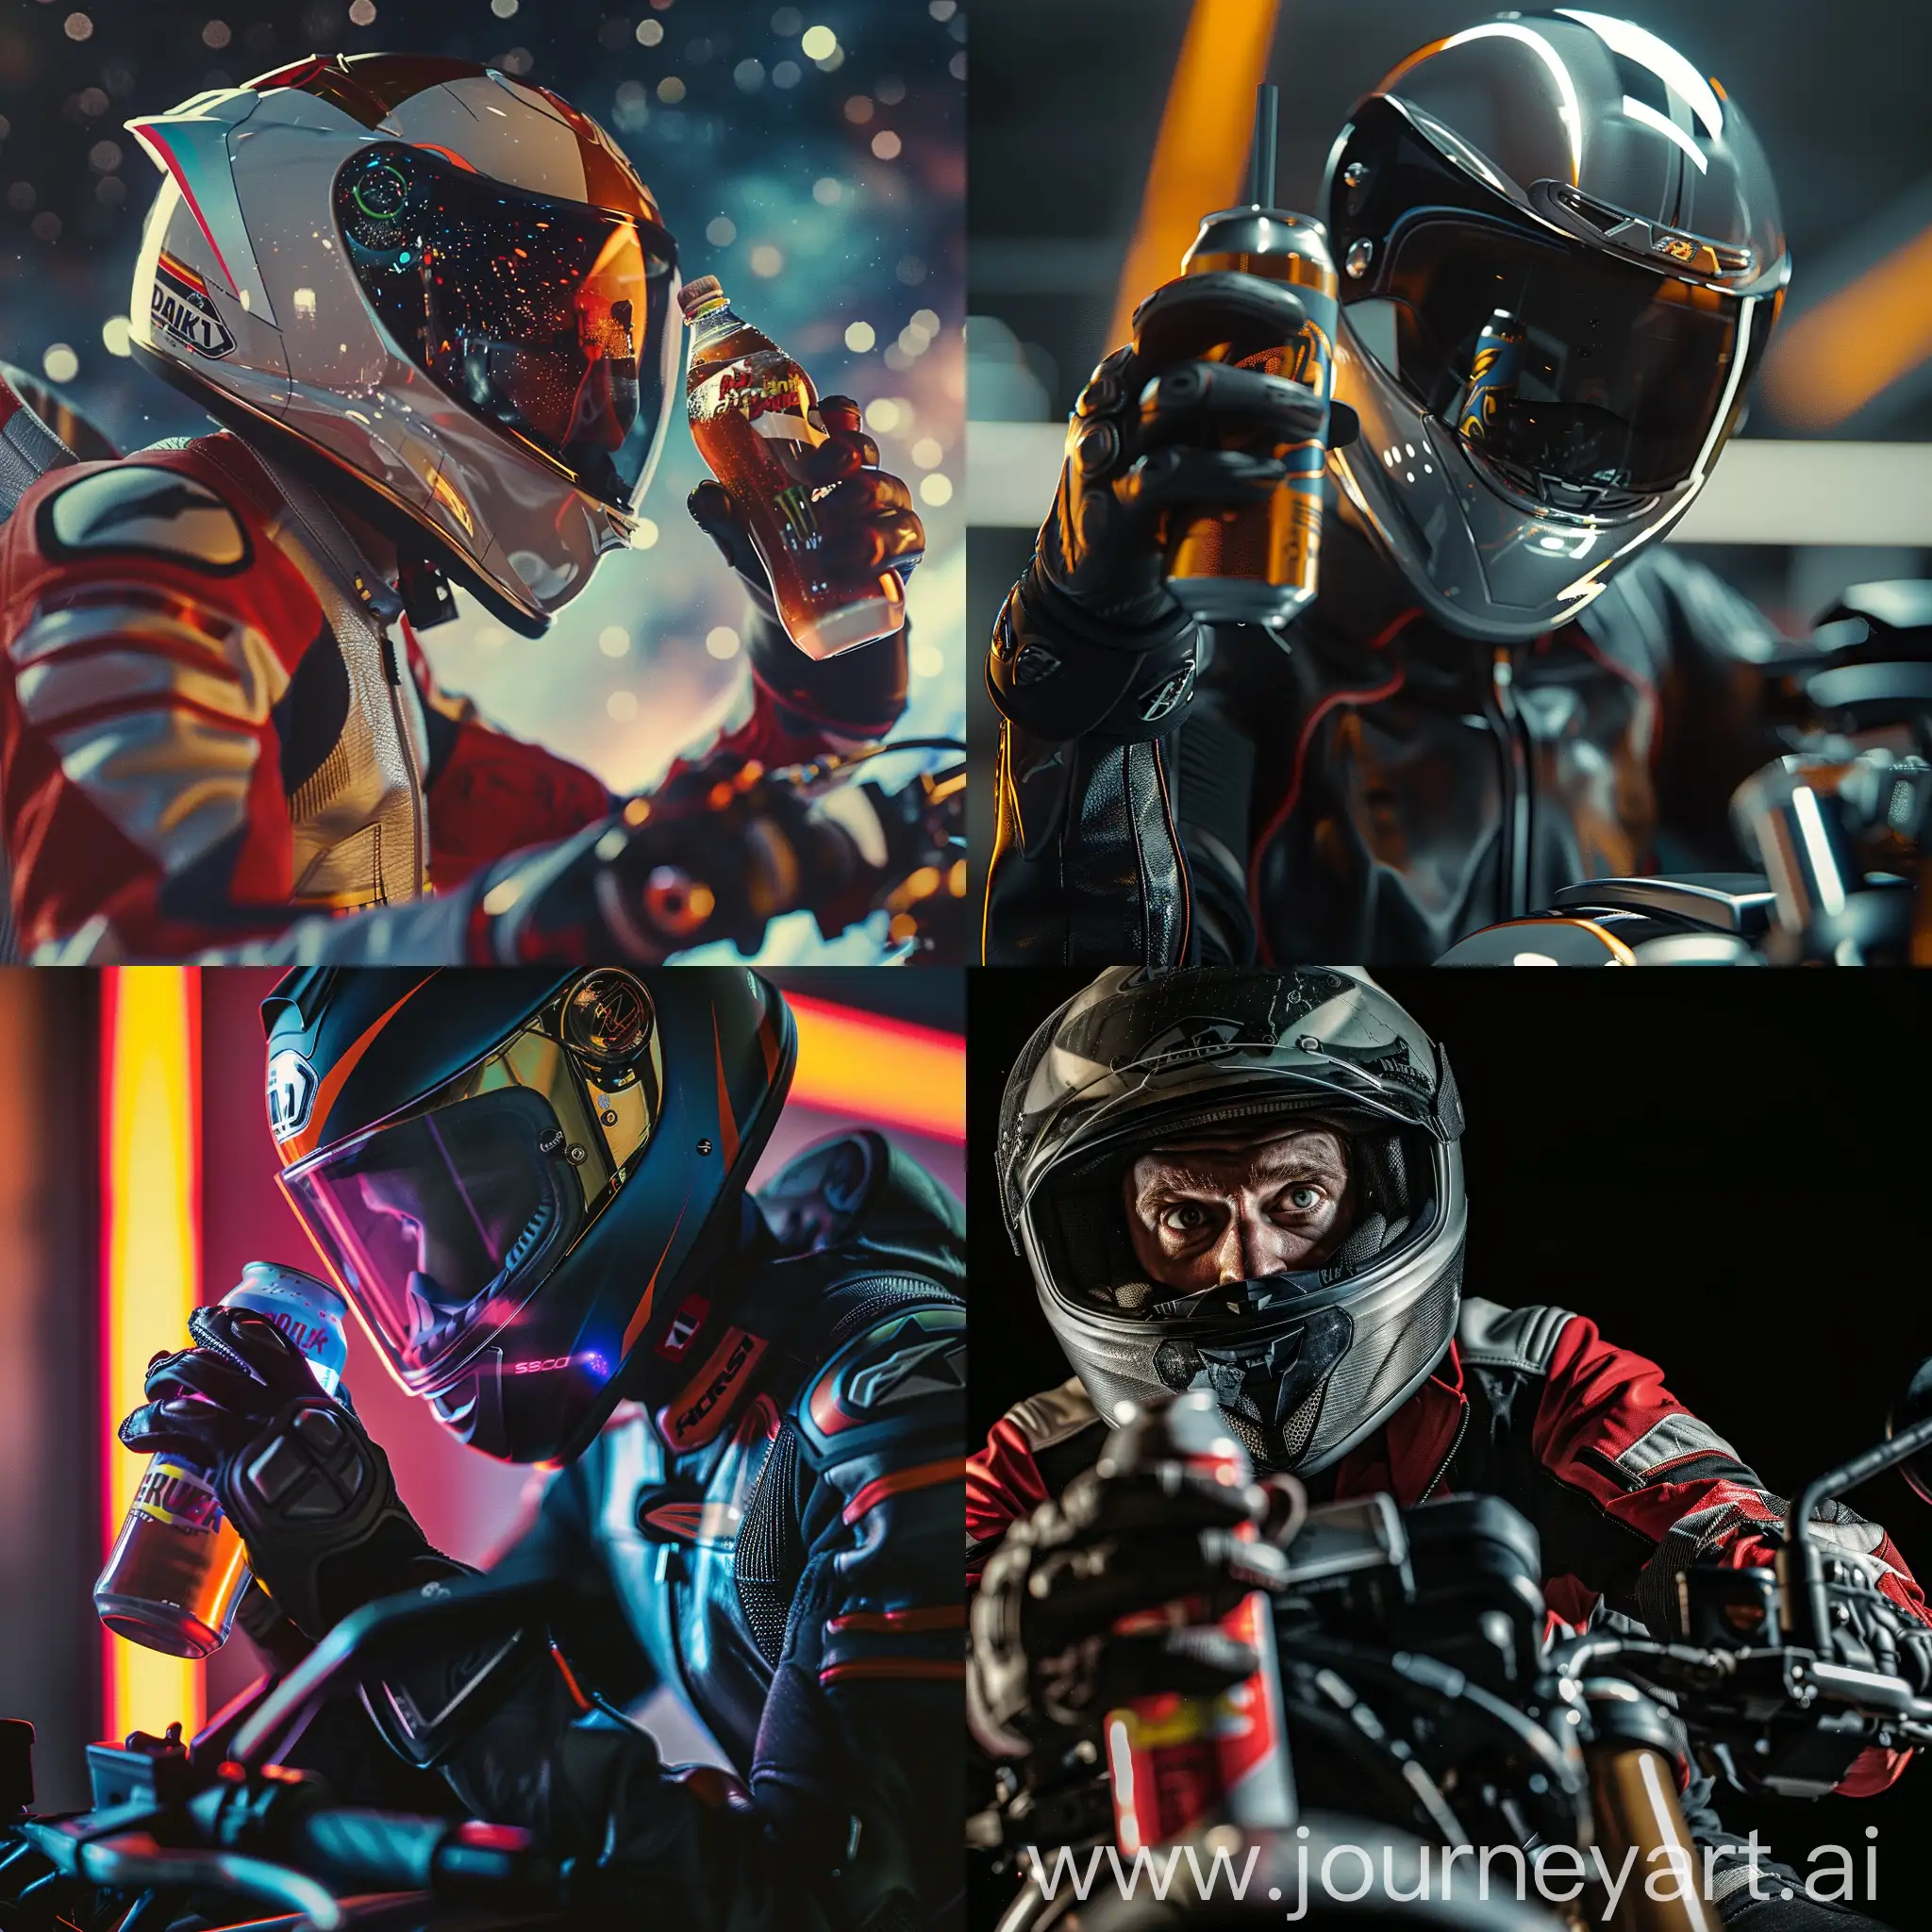 Motorcycle-Rider-with-Helmet-Holding-Energy-Drink-CloseUp